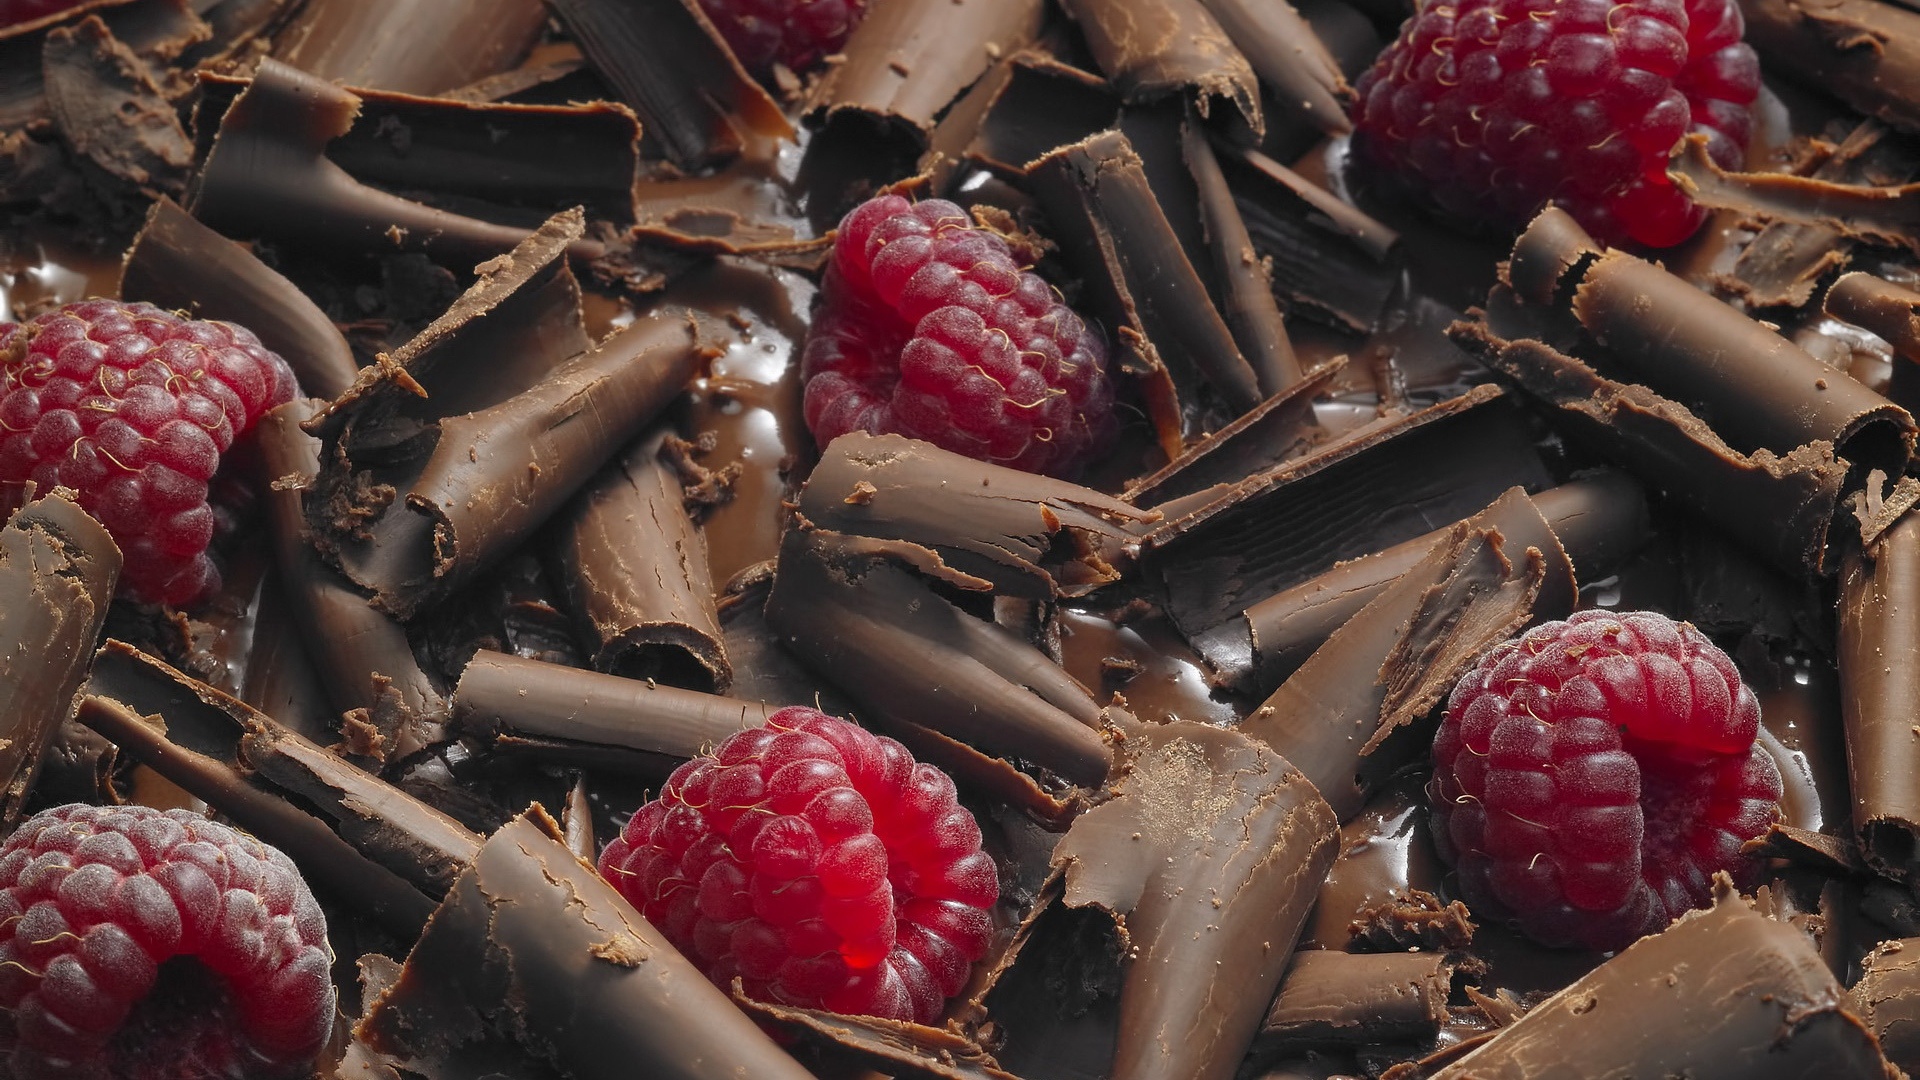 Decadent chocolate, Berry clipping, Delicious indulgence, Irresistible combination, 1920x1080 Full HD Desktop